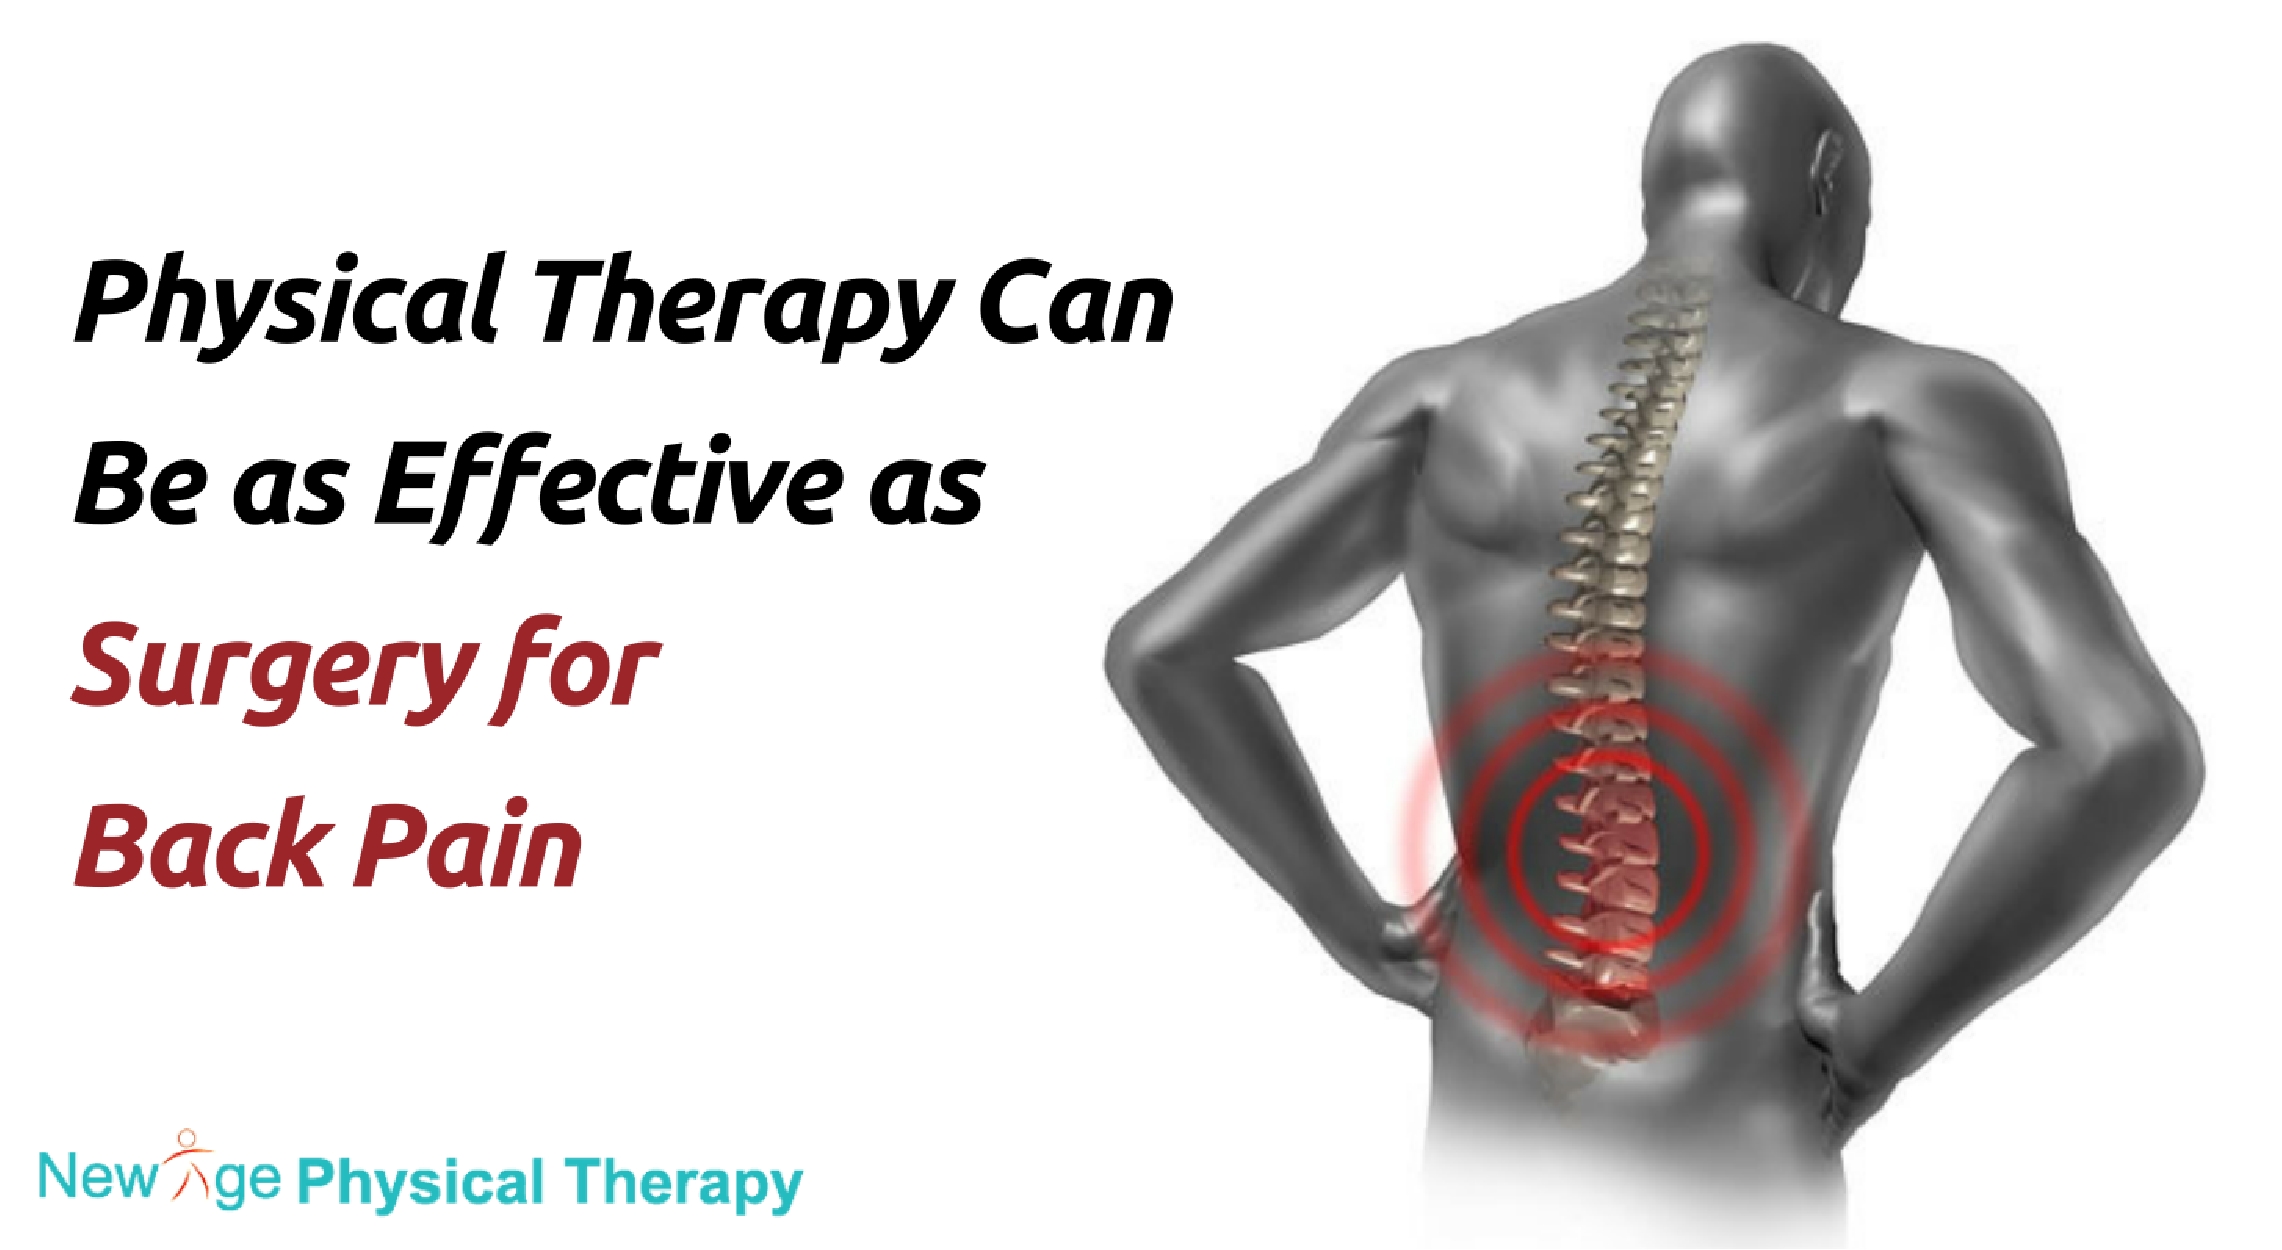 Physical Therapy Can Be as Effective as Surgery for Back Pain	